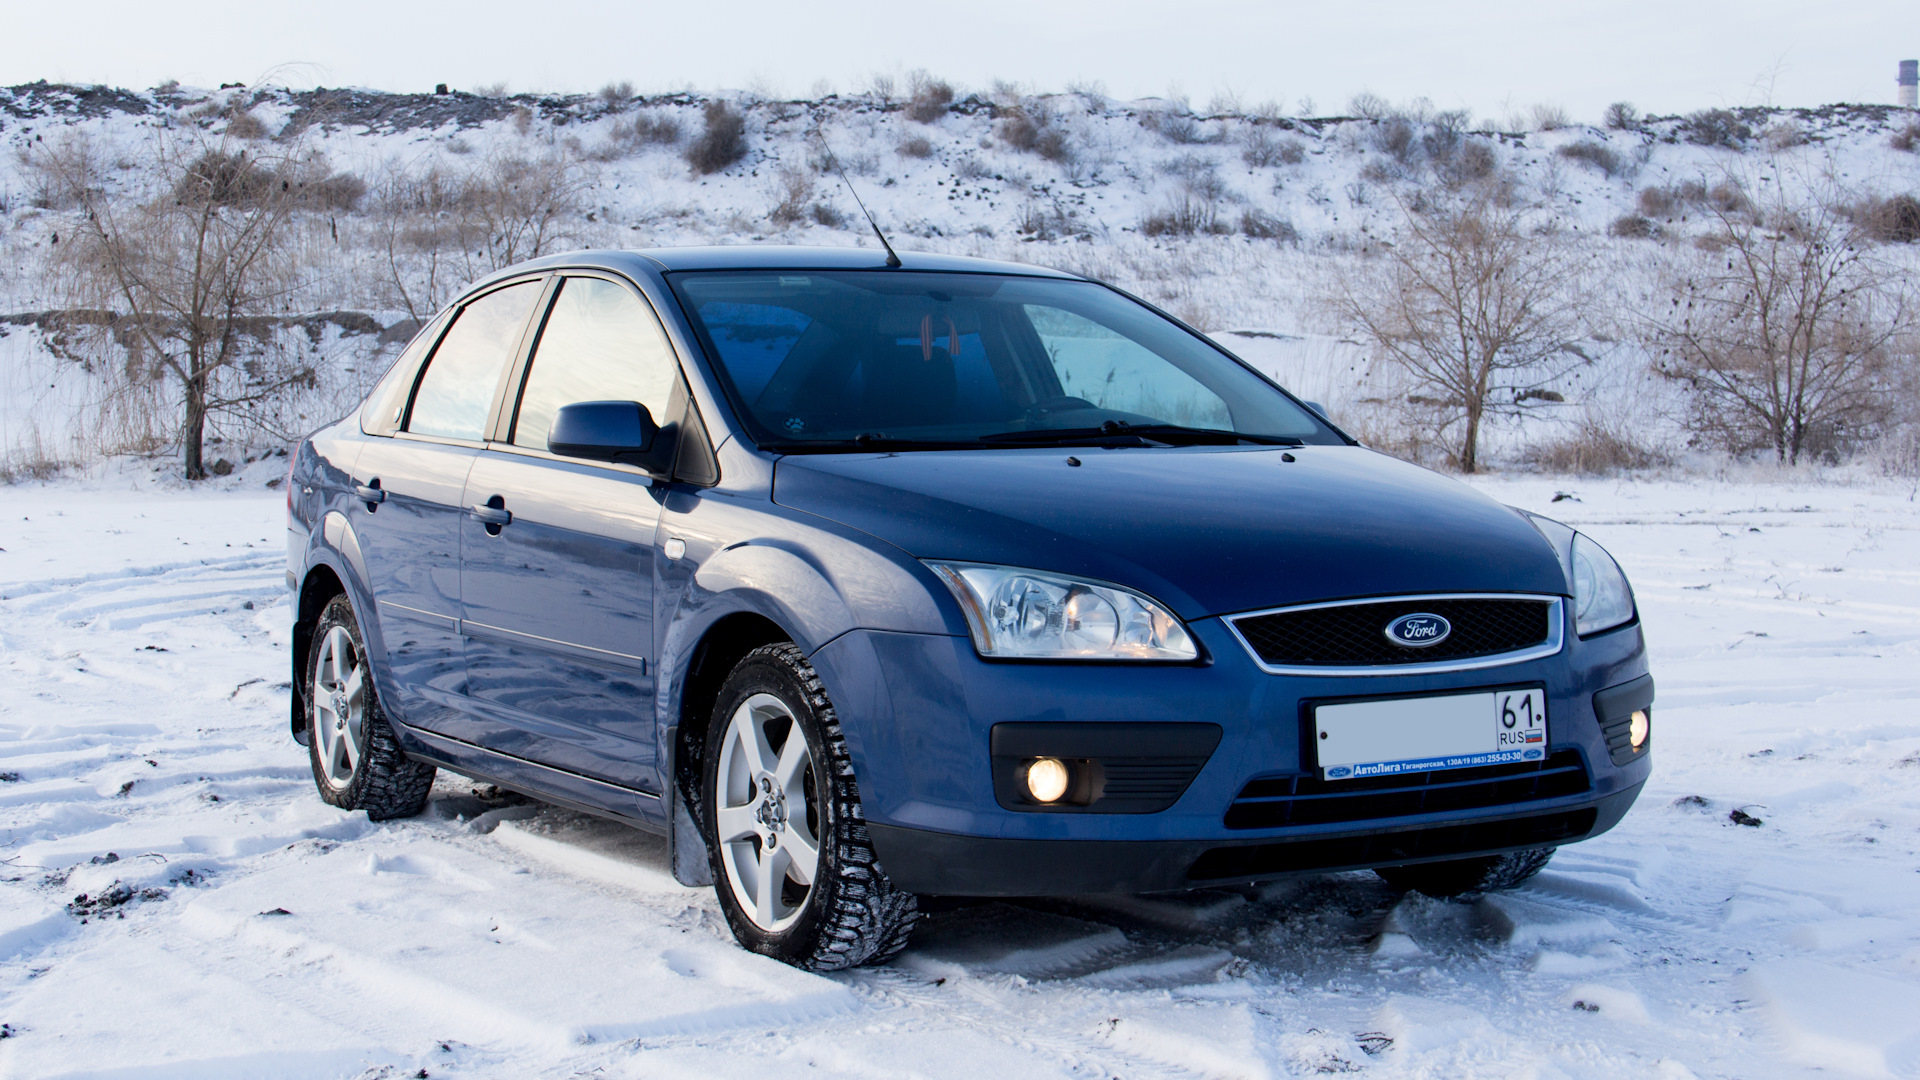 Ford focus цвет. Форд фокус 2 седан. Форд фокус 2 седан синий. Форд фокус 2005 седан. Форд фокус 2 седан 2007 2.0.